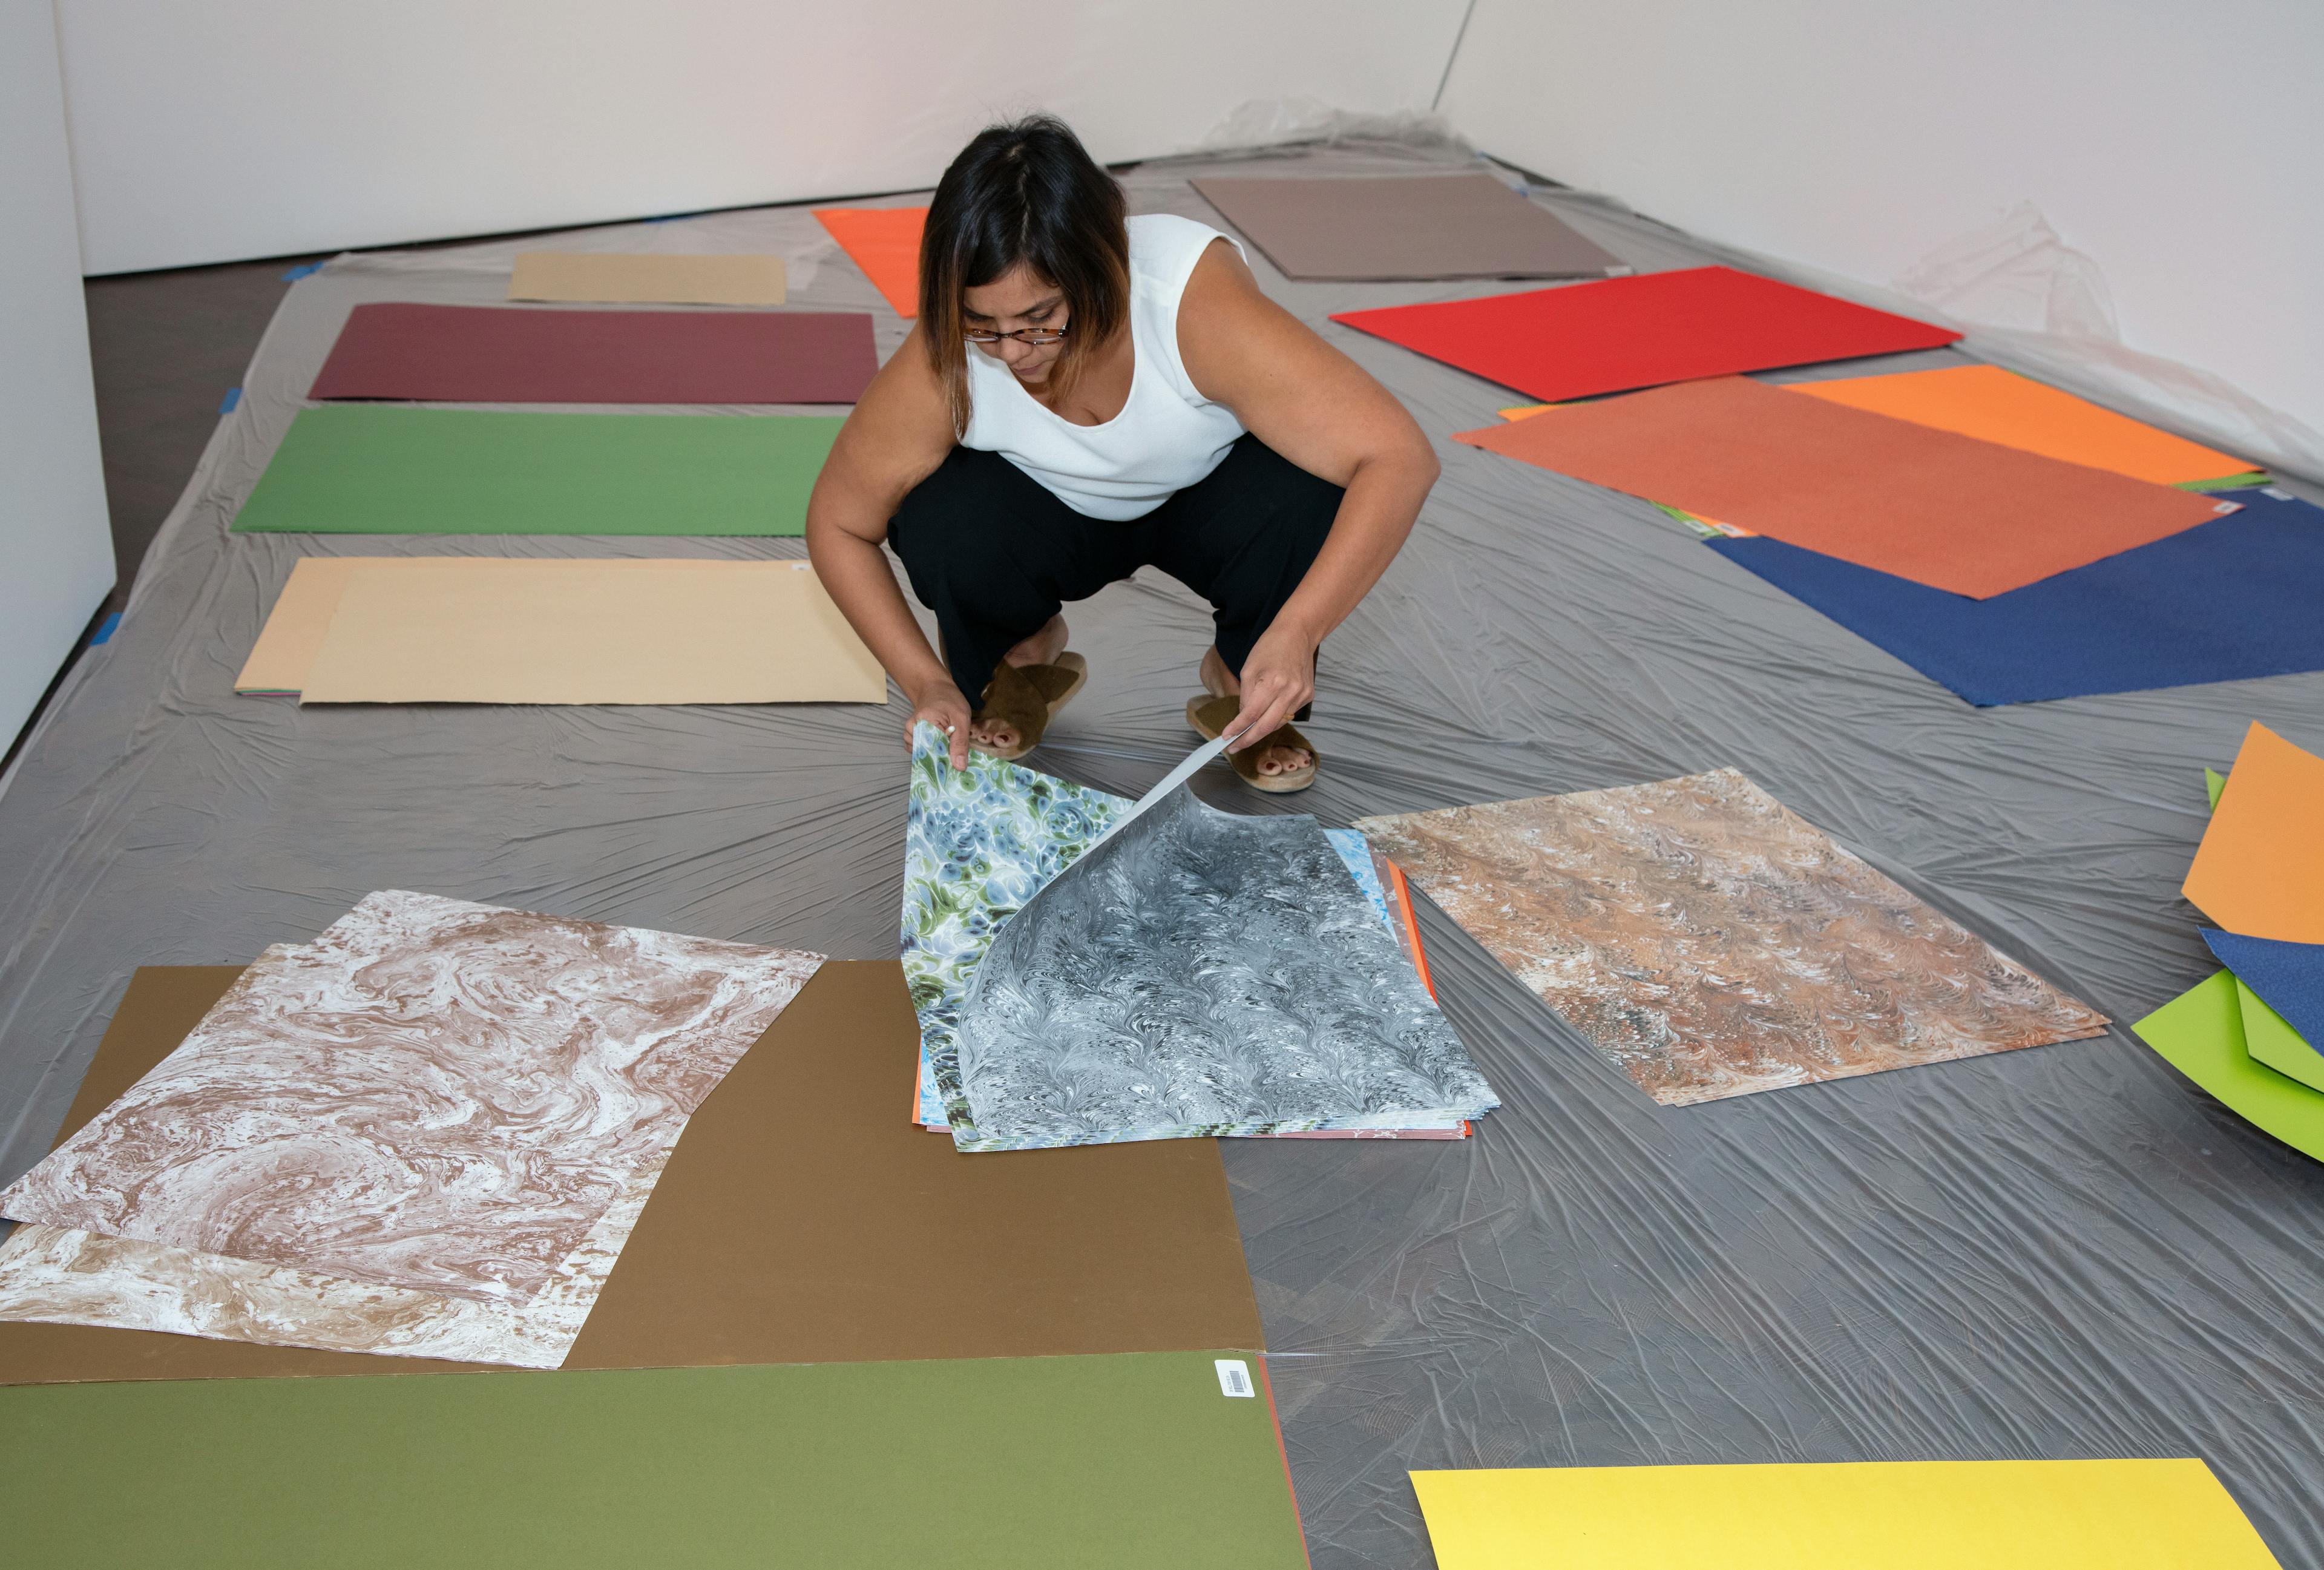 Artist Xochi Solis crouching down on a plastic mat, surrounded by sheets of colorful paper and patterns.